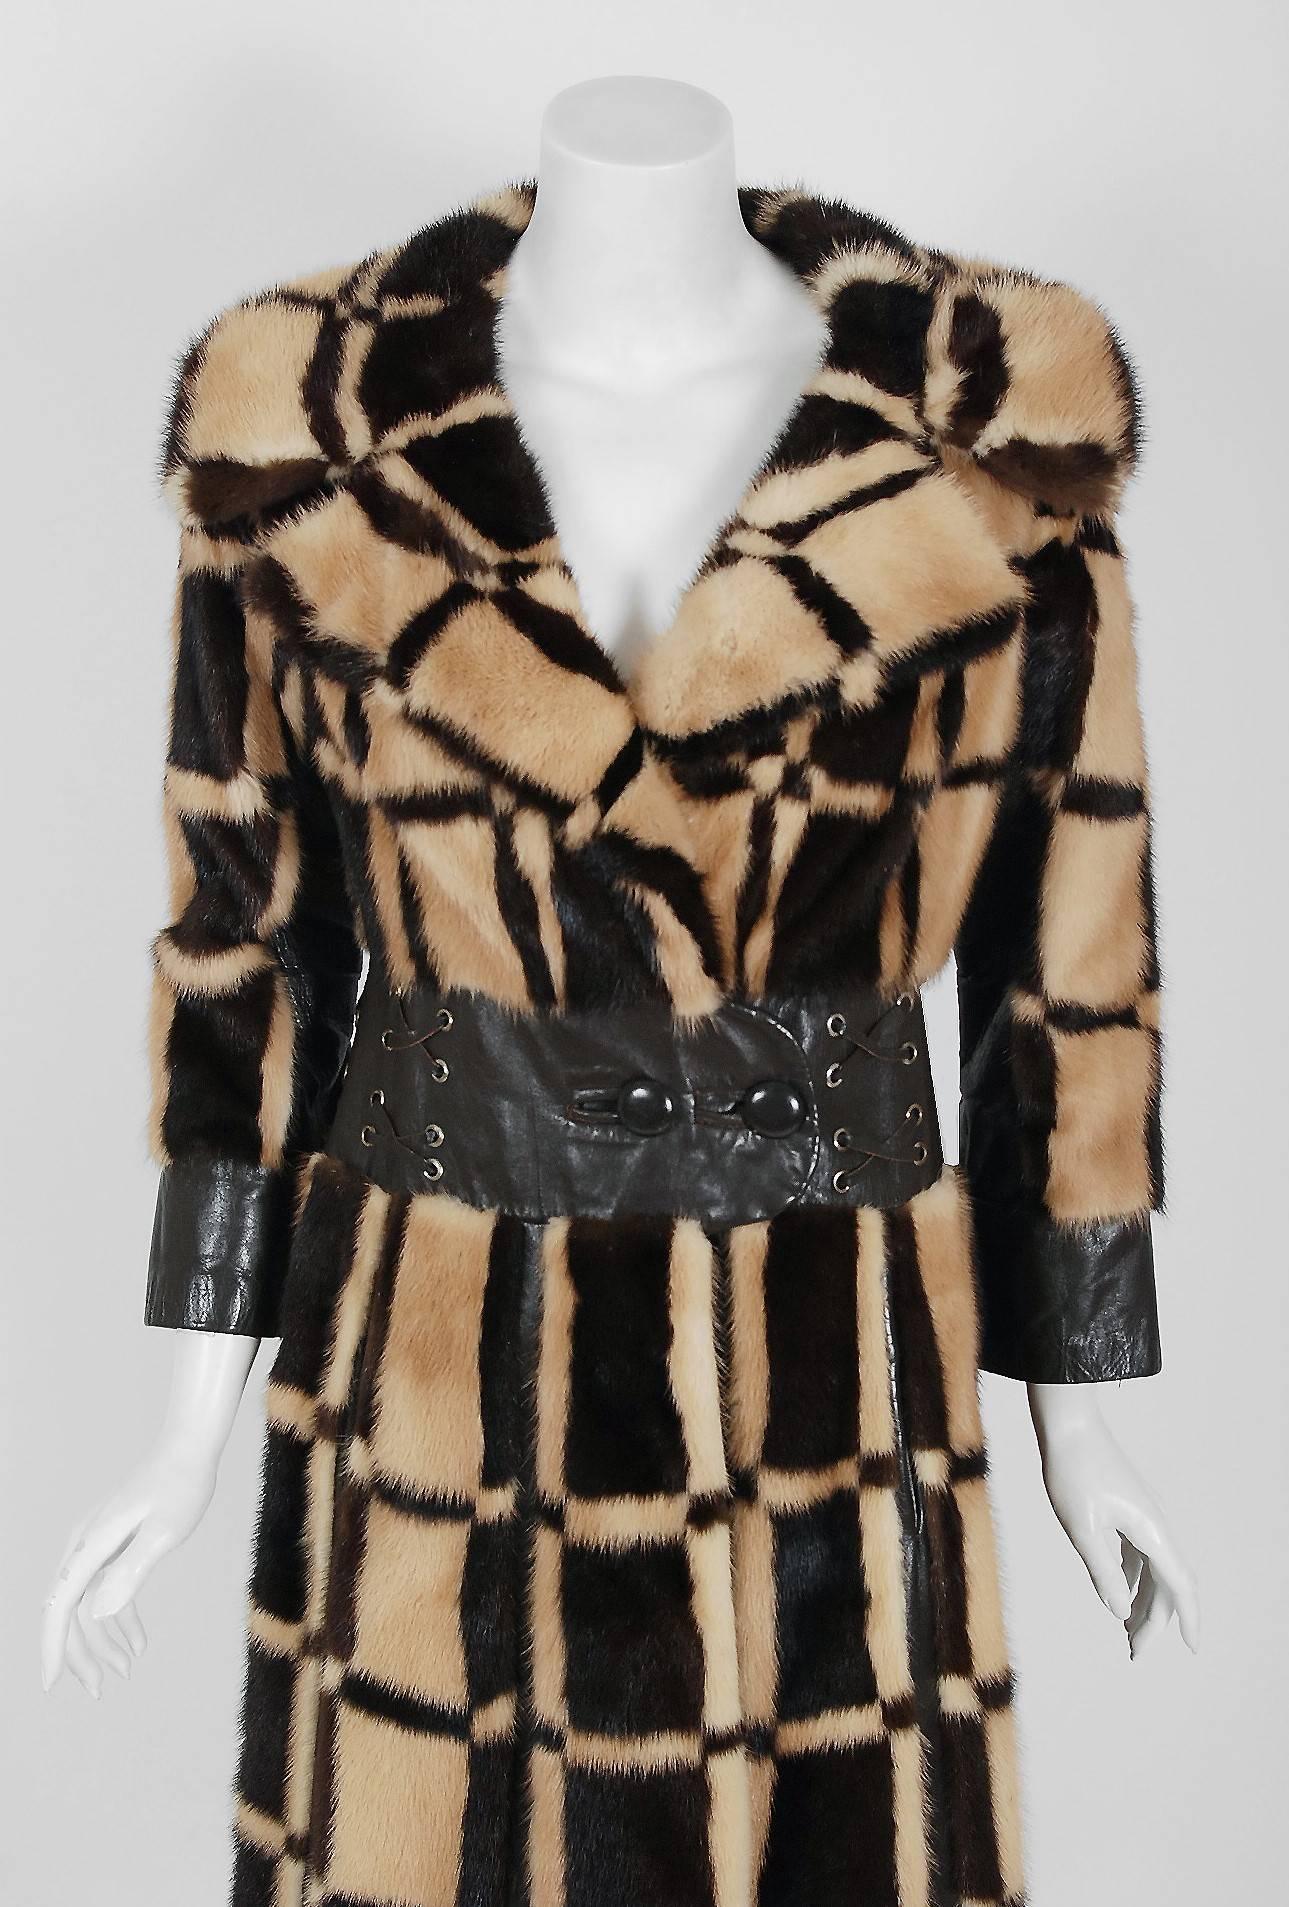 Exquisite Pierre Cardin designer genuine mink-fur and leather coat dating back to his 1972 Fall/Winter collection. The luxurious blonde and chocolate brown mink has been worked into an almost deco-square checkered pattern and the effect is really